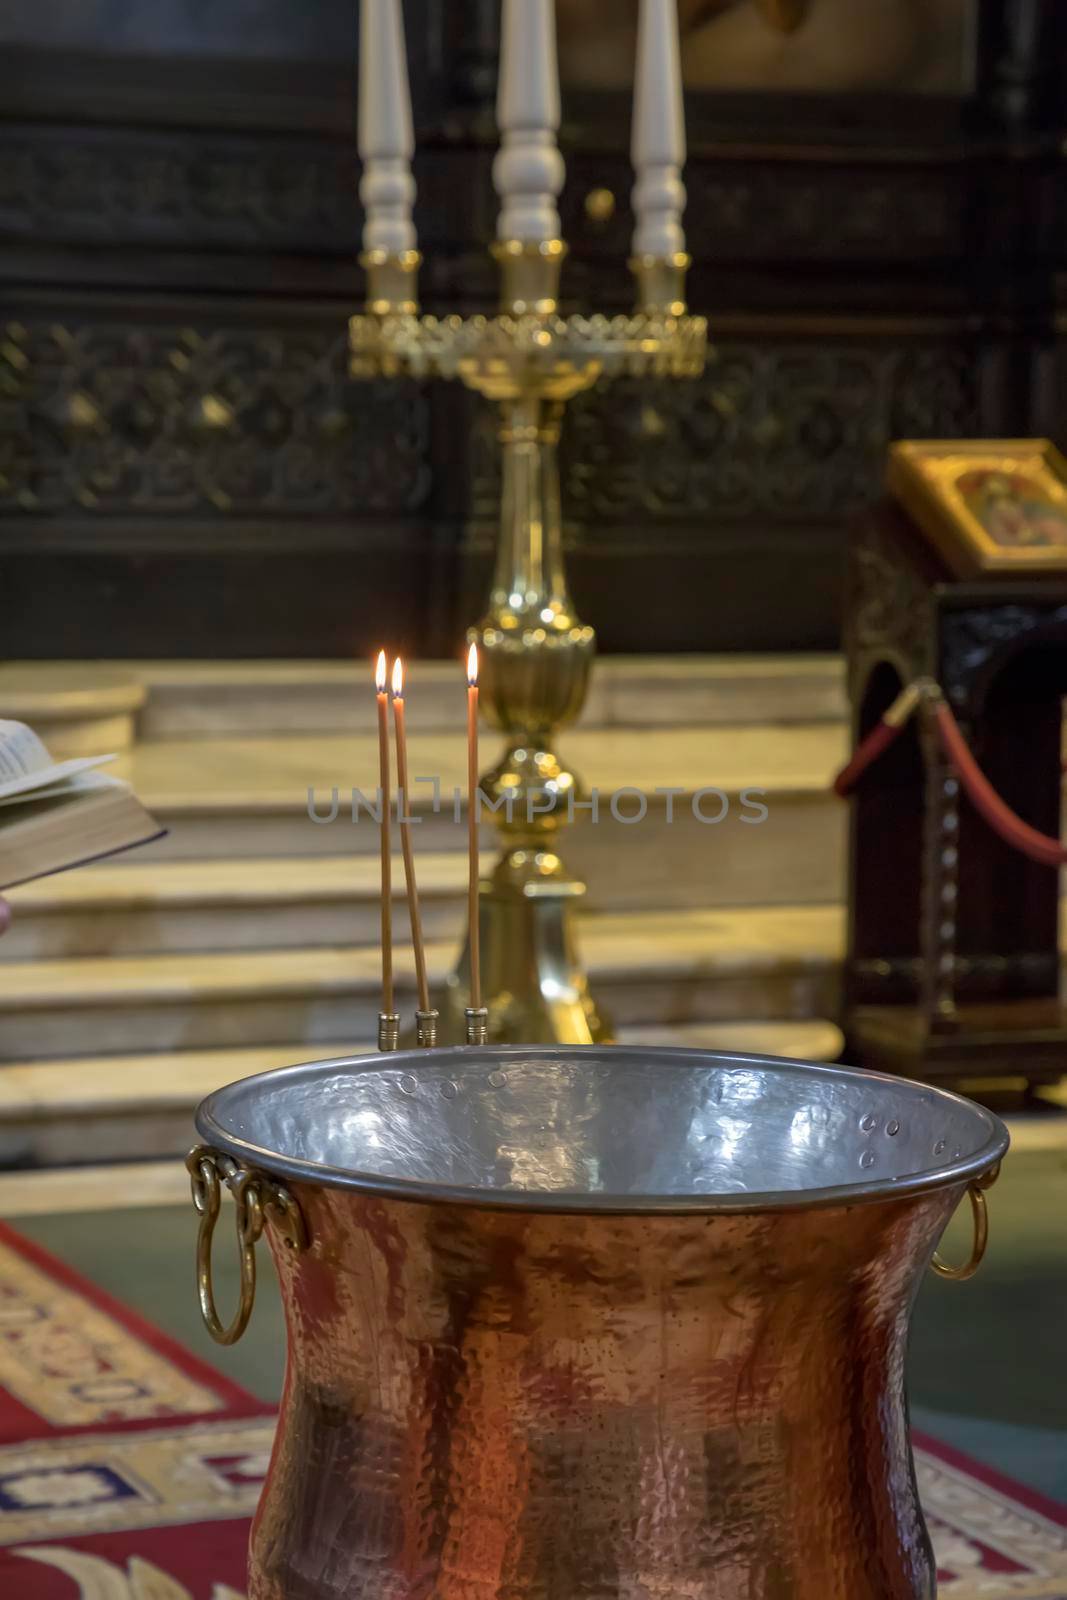 Christening in the church. Church utensils in the Orthodox church. A big bowl of water for the baptism of a baby with wax candles. by EdVal